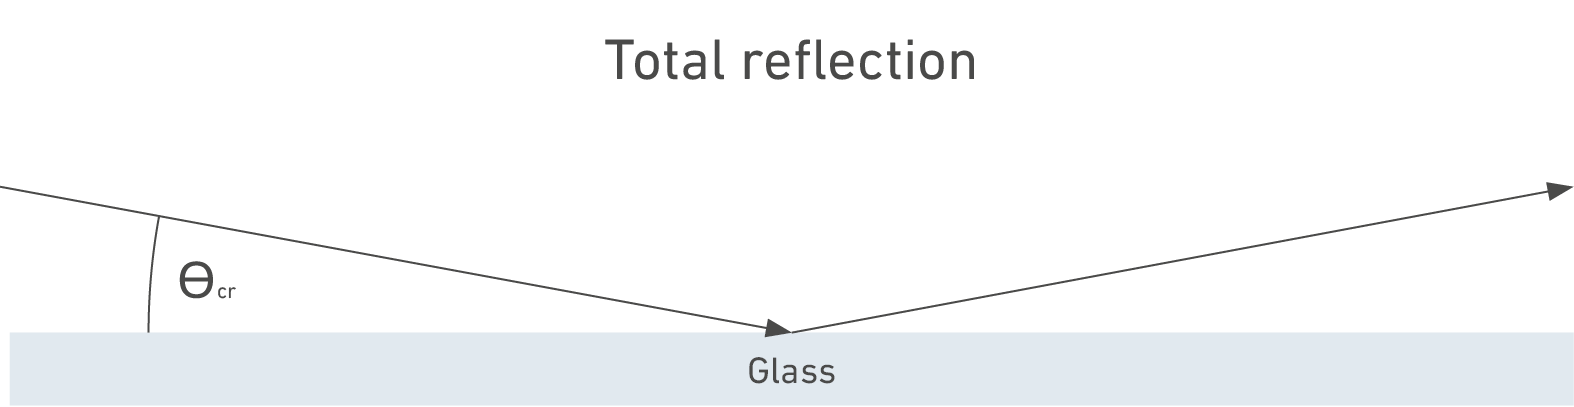 Total reflection